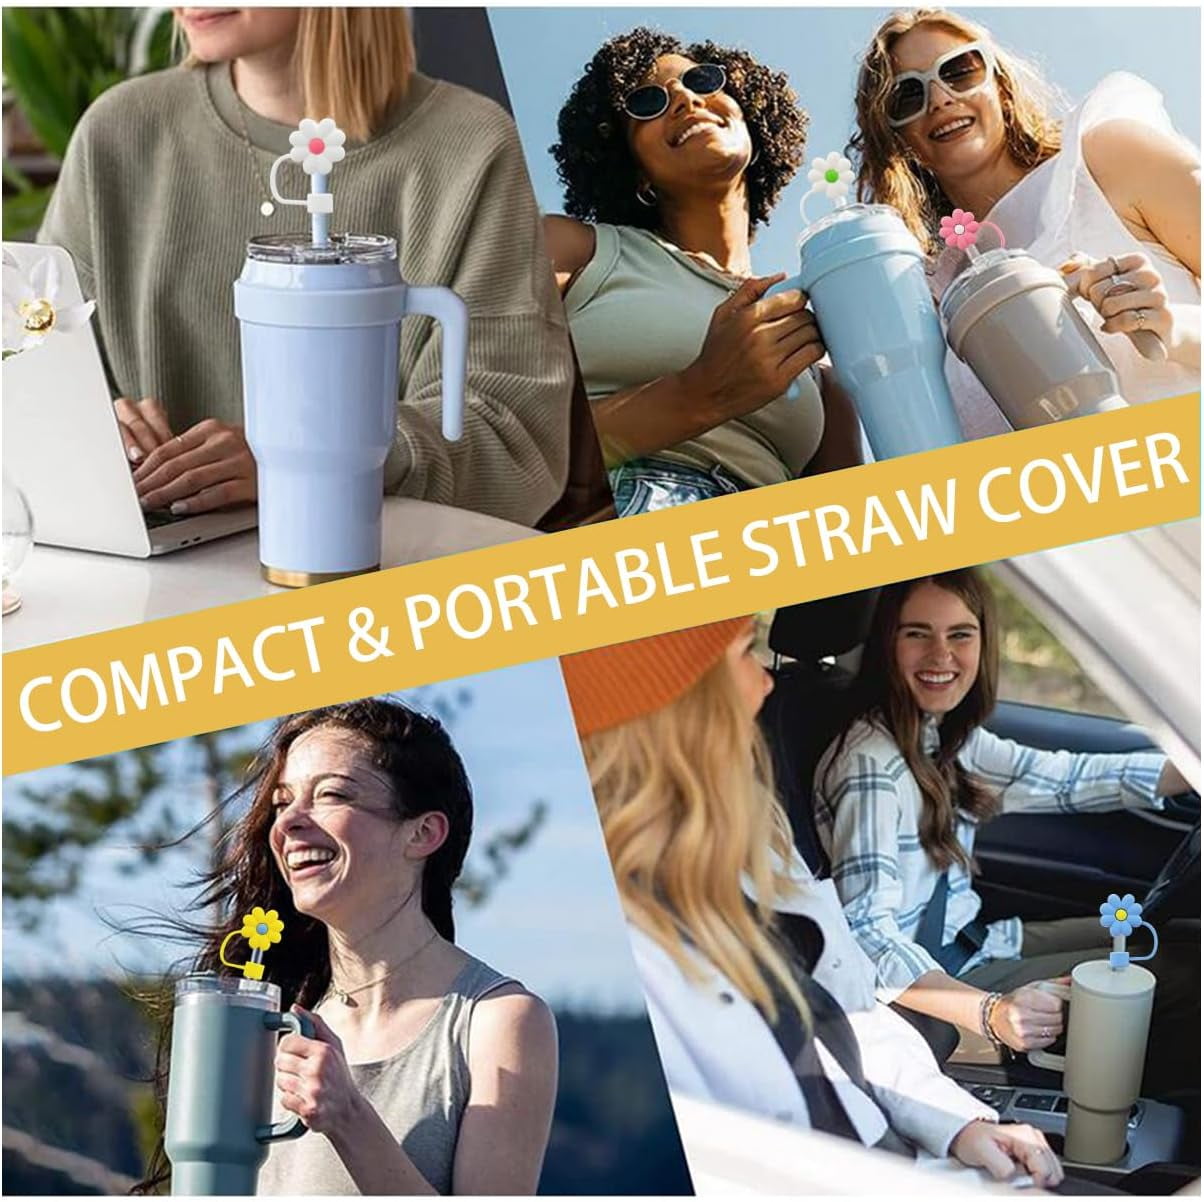 Stanley Straw Topper Cover Stanley Drink Topper Drink Cup Cover for Stanley  Accessories Vanilla Ice Cream Straw Cap Reusable Straw Cover 